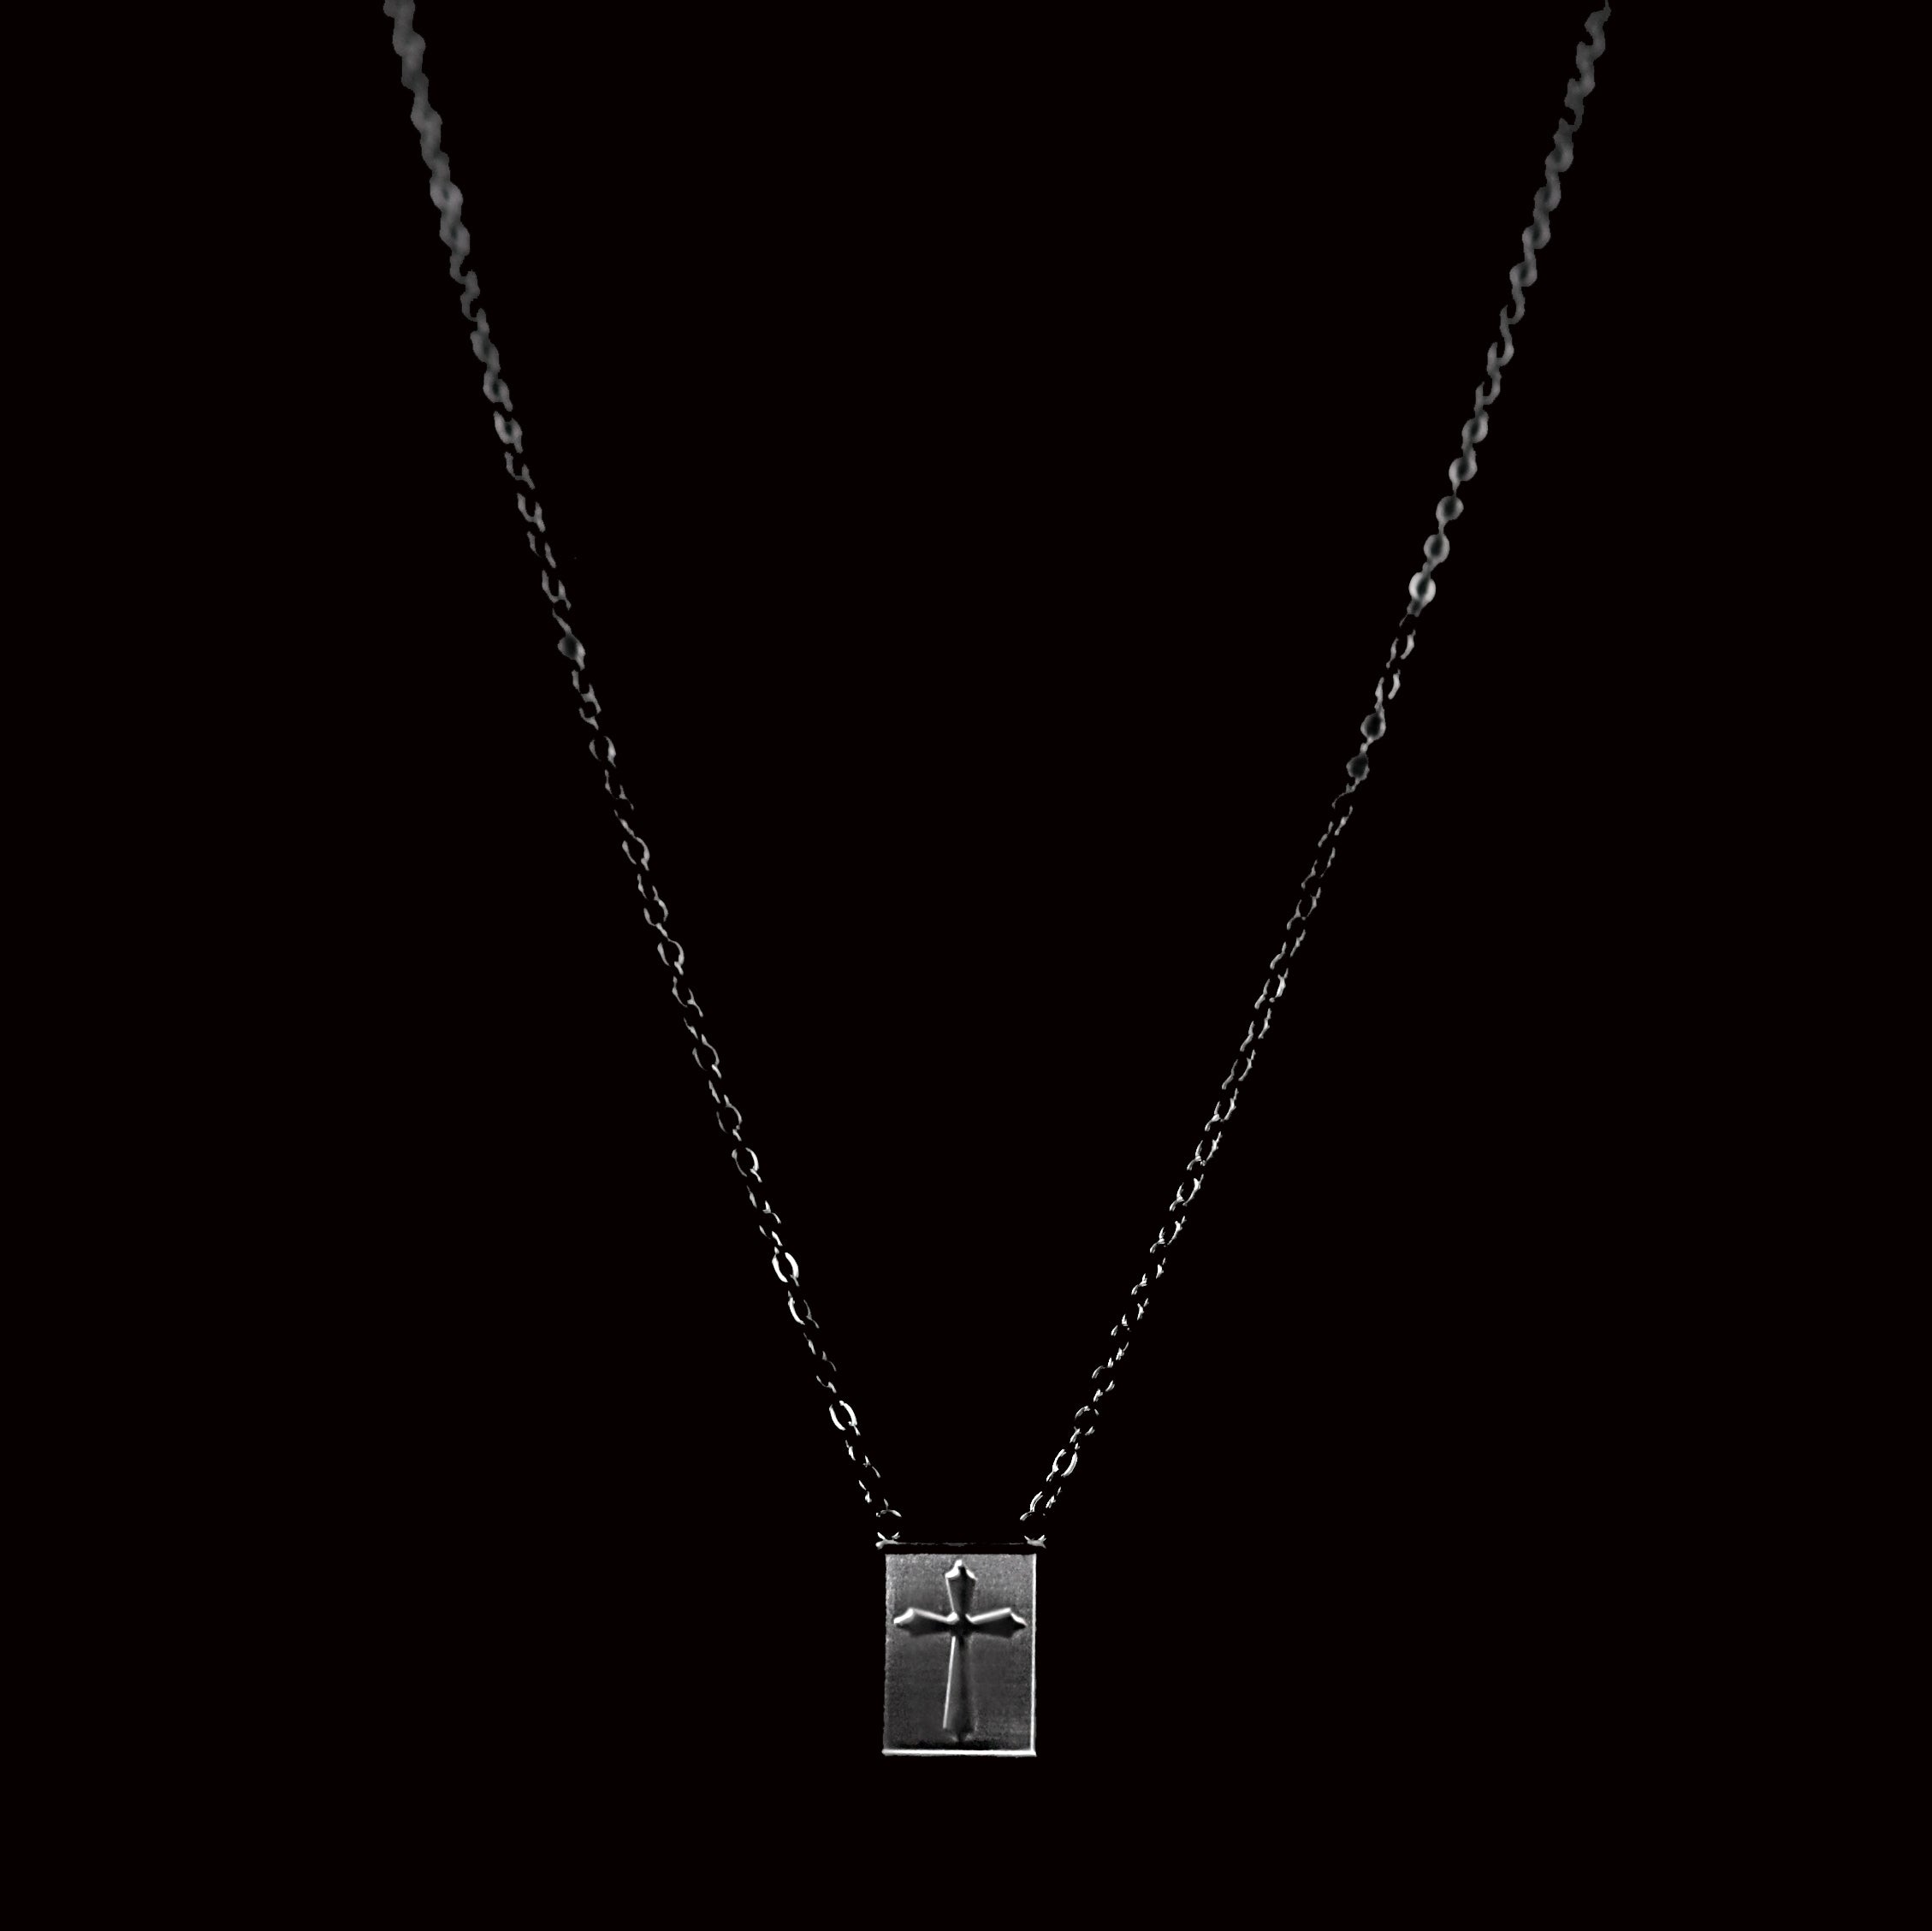 Paxon Stainless Steel Chain Necklace with Symbolic Pendant